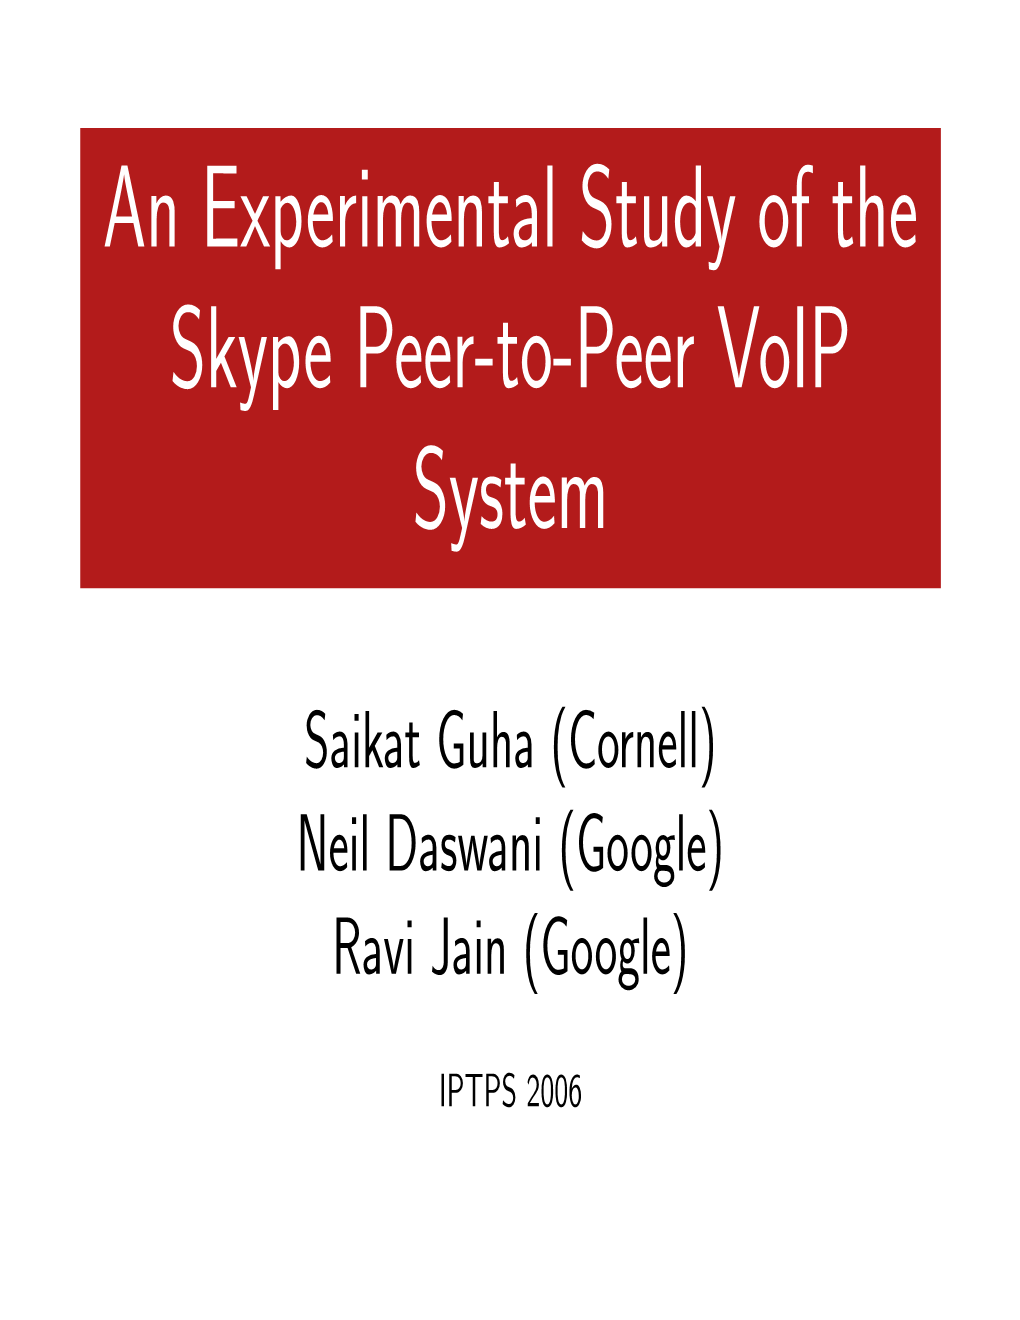 An Experimental Study of the Skype Peer-To-Peer Voip System